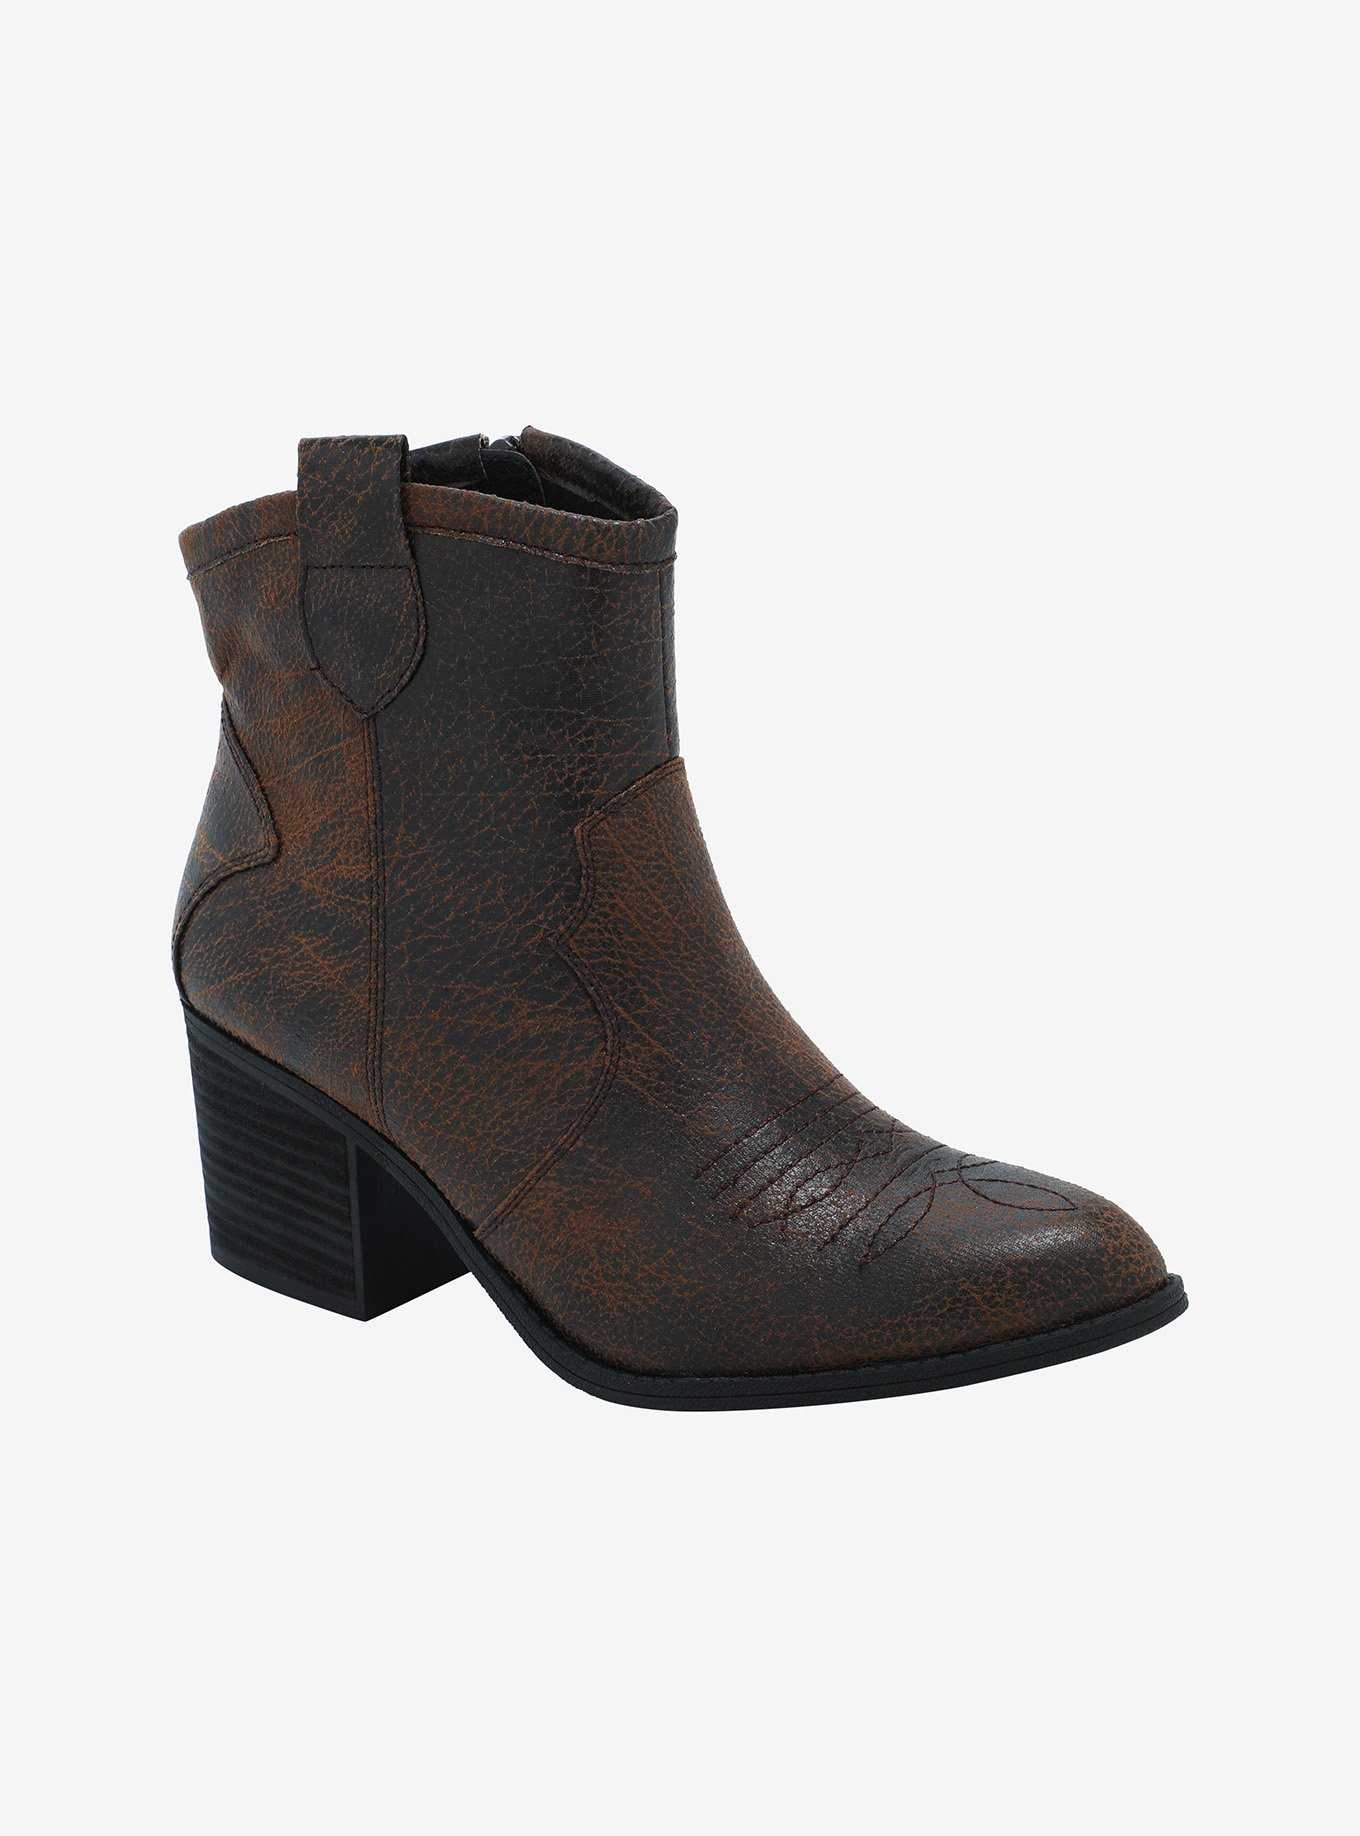 Dirty Laundry Brown Cowboy Ankle Boots, , hi-res